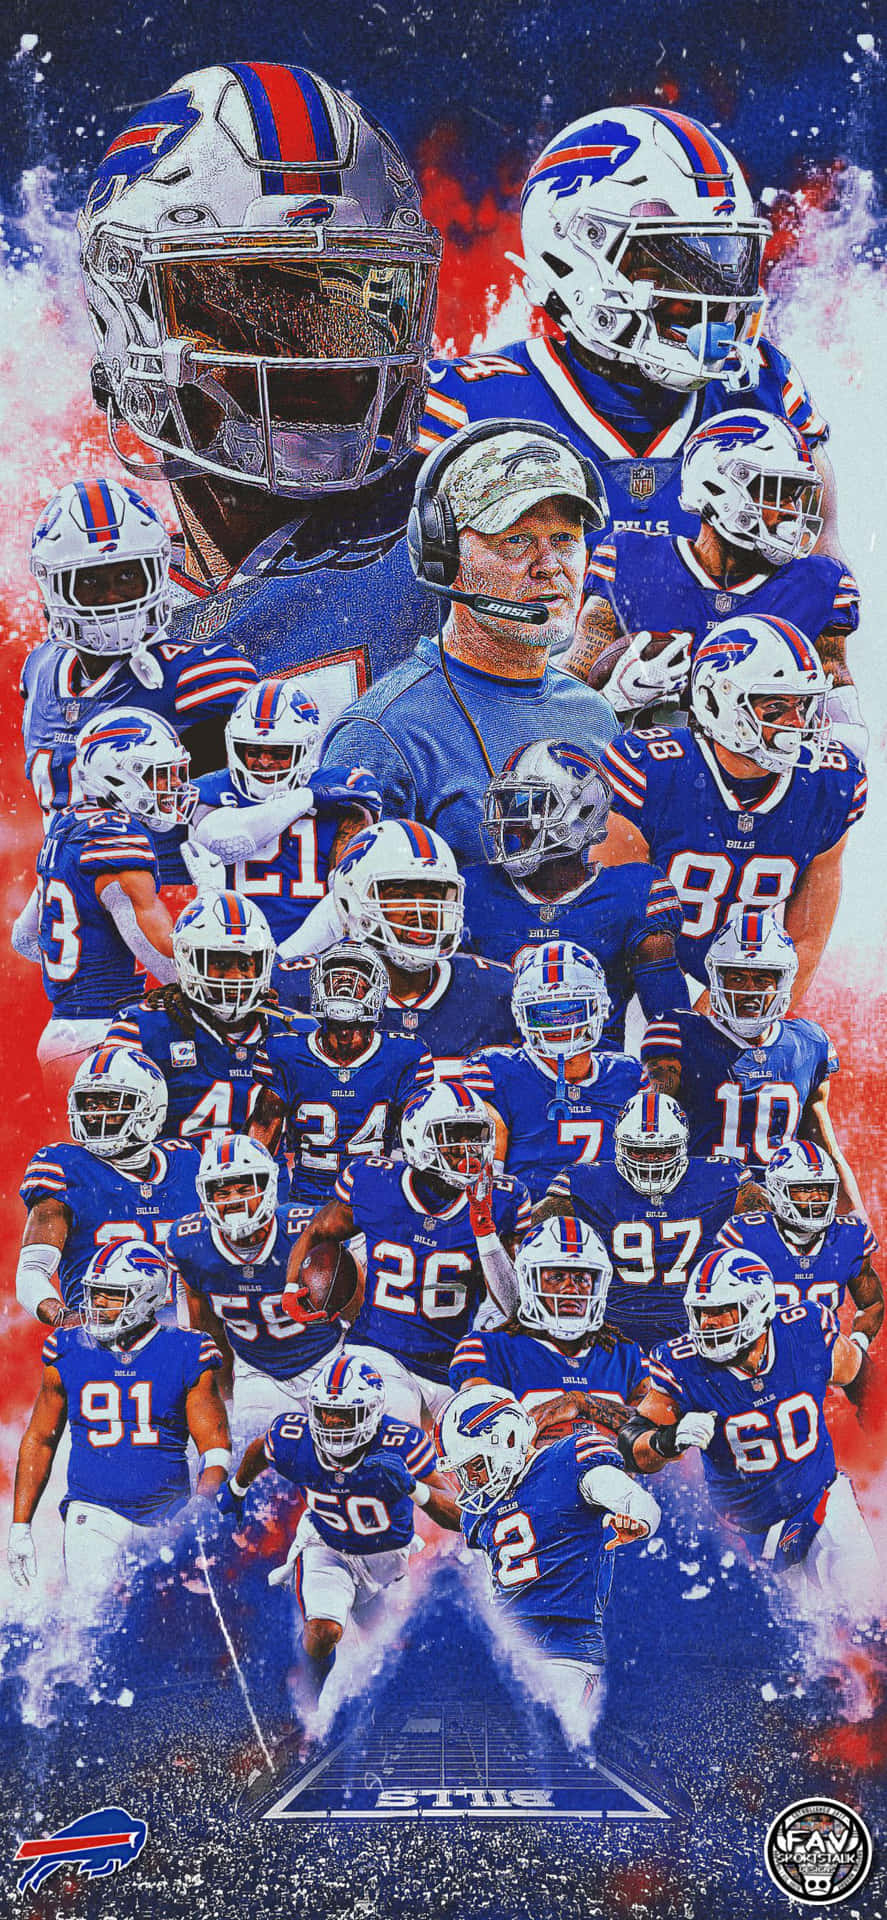 The Buffalo Bills charge towards victory